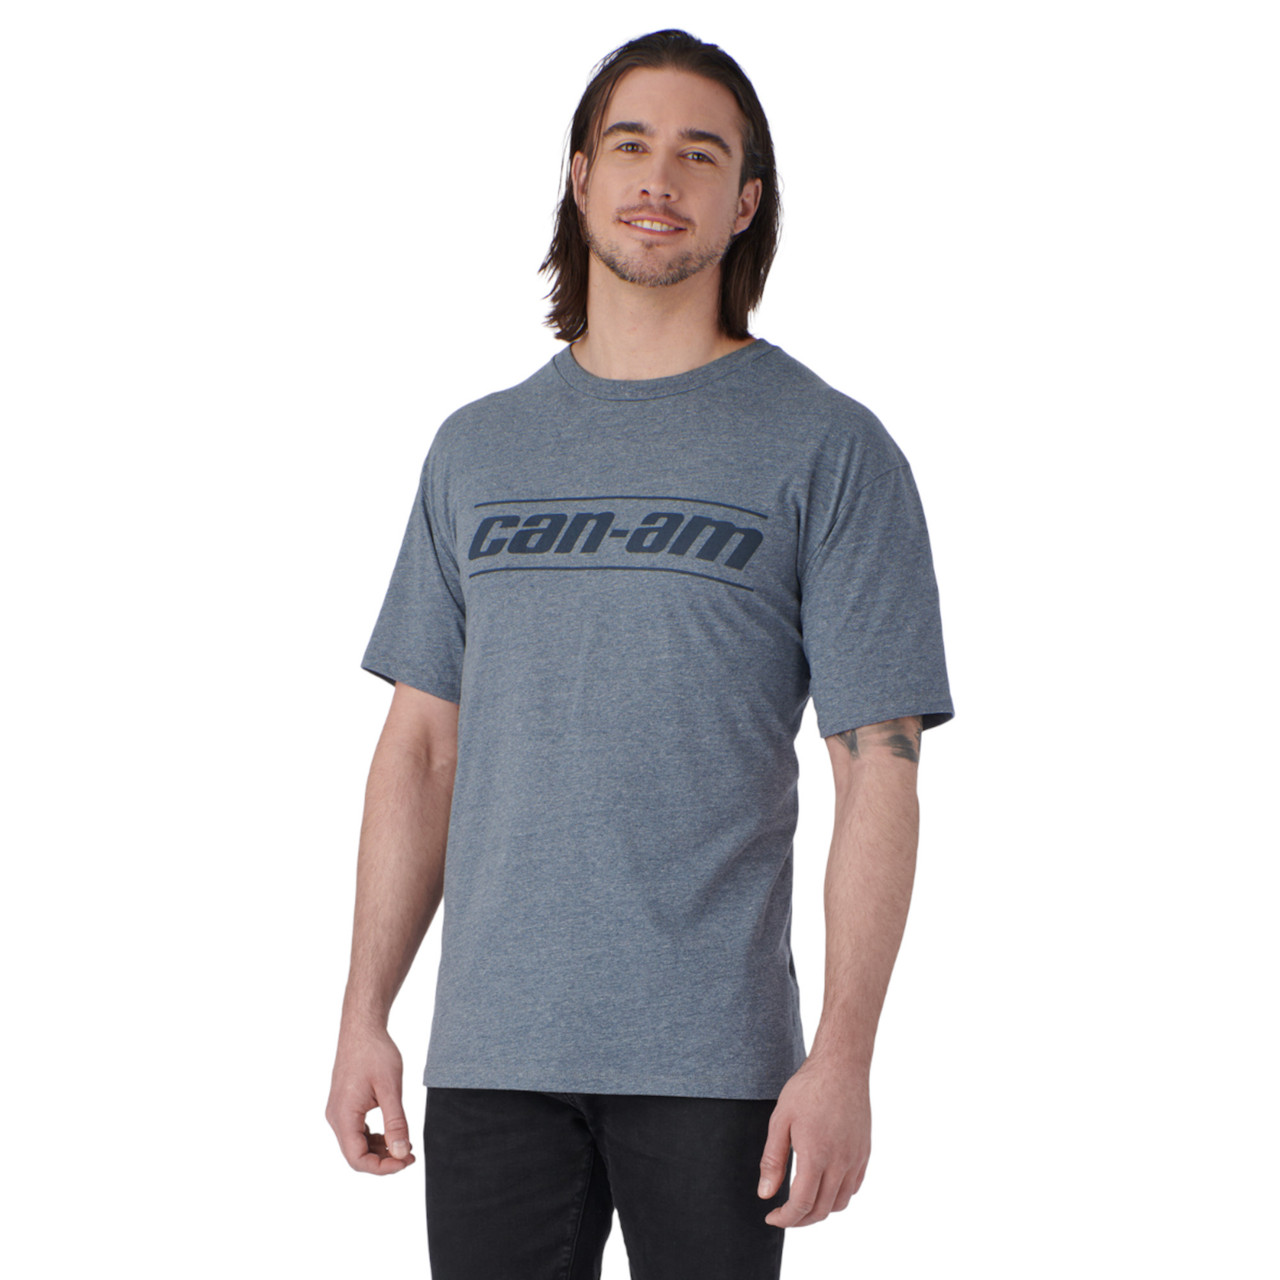 Can-Am New OEM, Men's Small Cotton Signature Branded T-Shirt, 4547540429